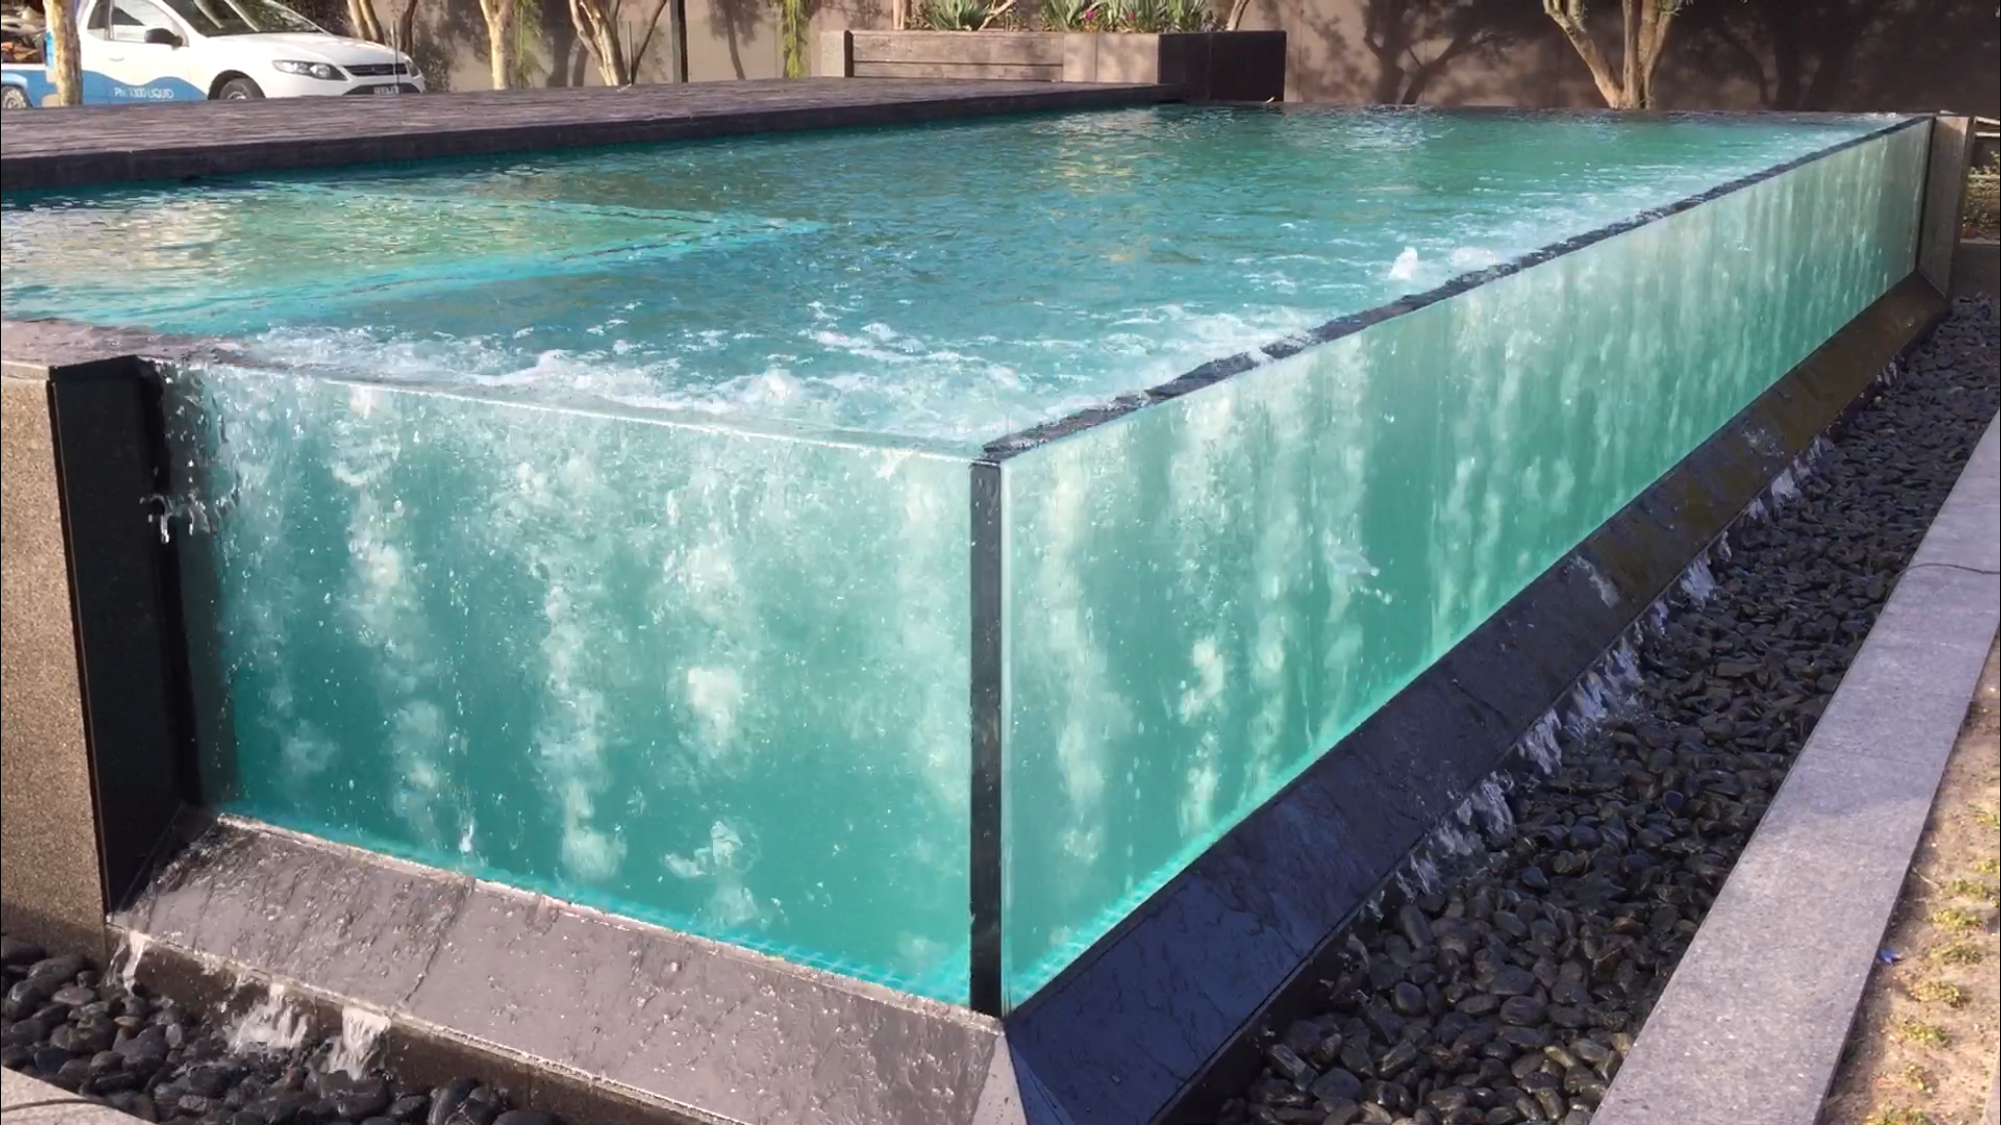 Leyu is a manufacturer of acrylic swimming pools and an expert in swimming pool construction - Leyu